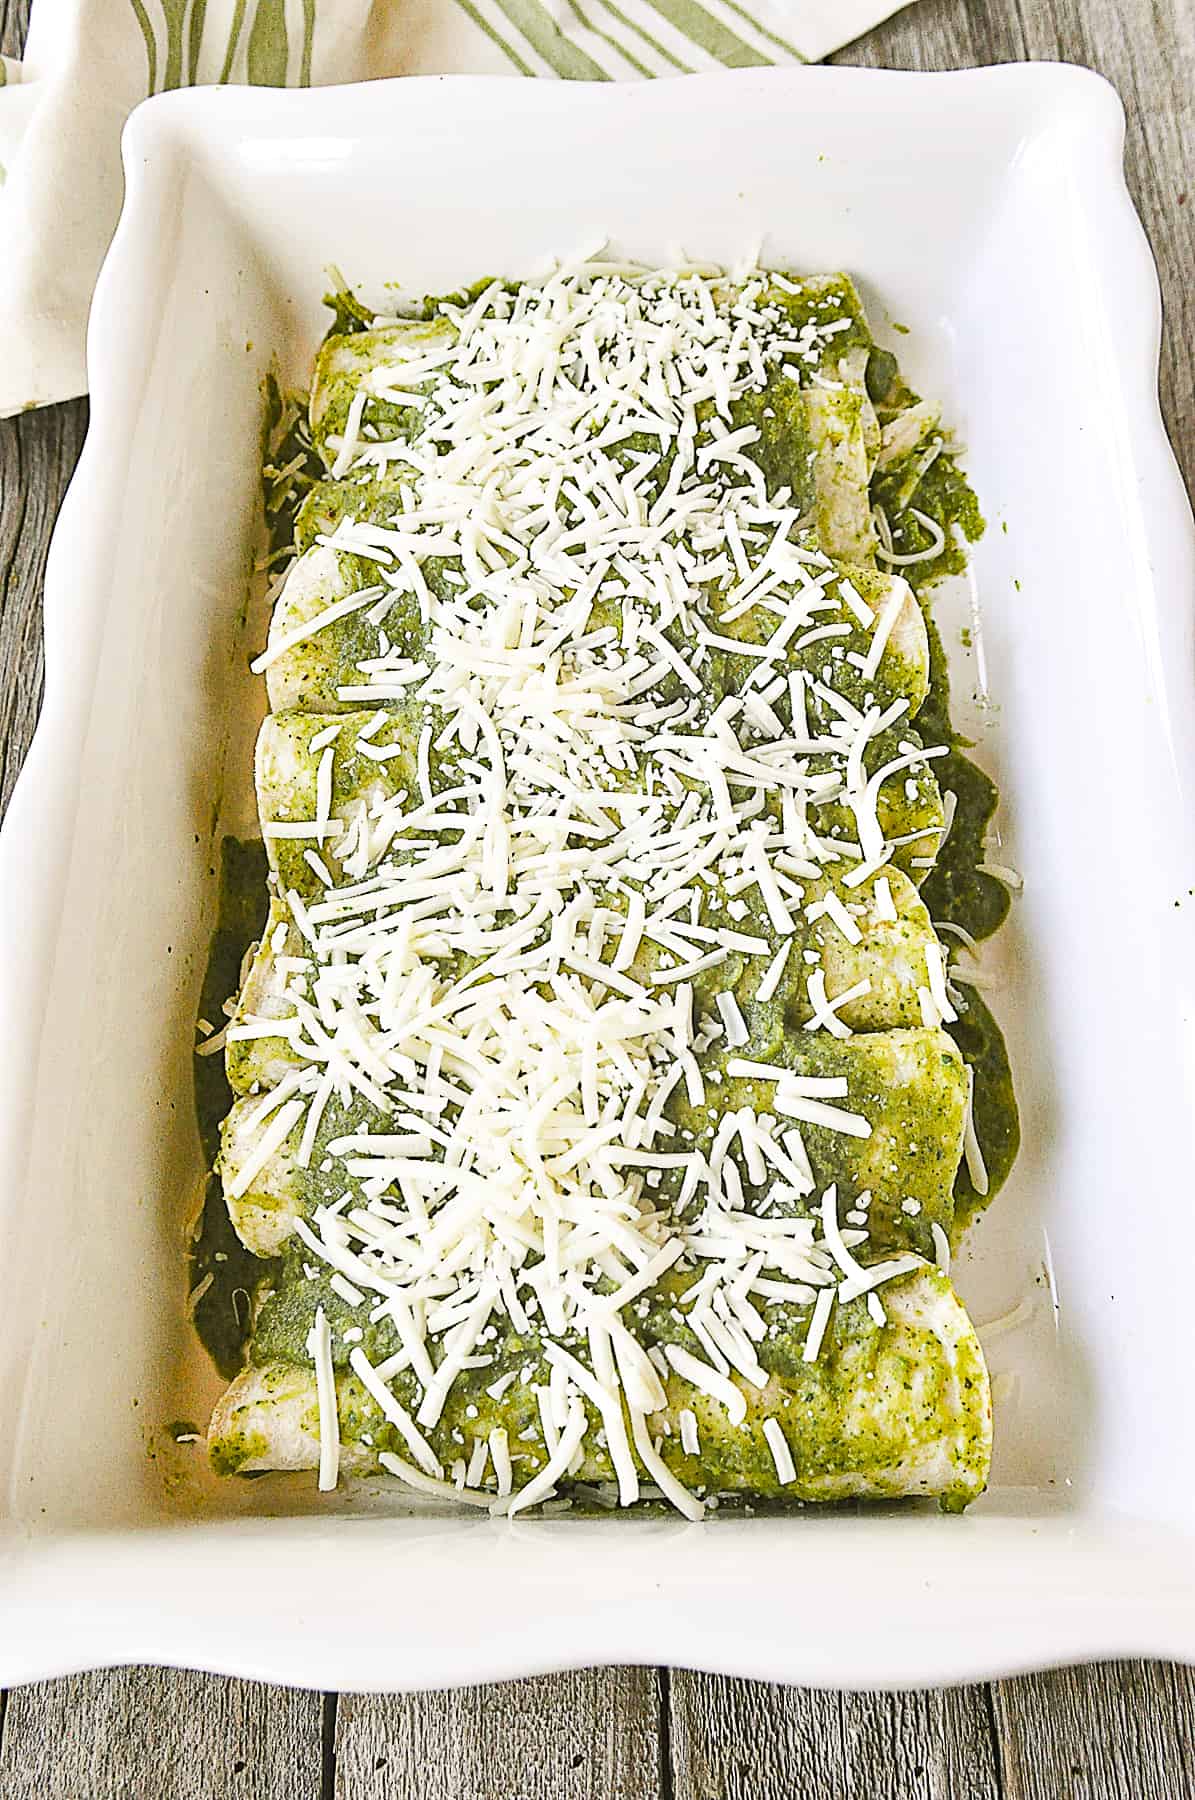 green chili enchiladas rolled up and ready for the oven.